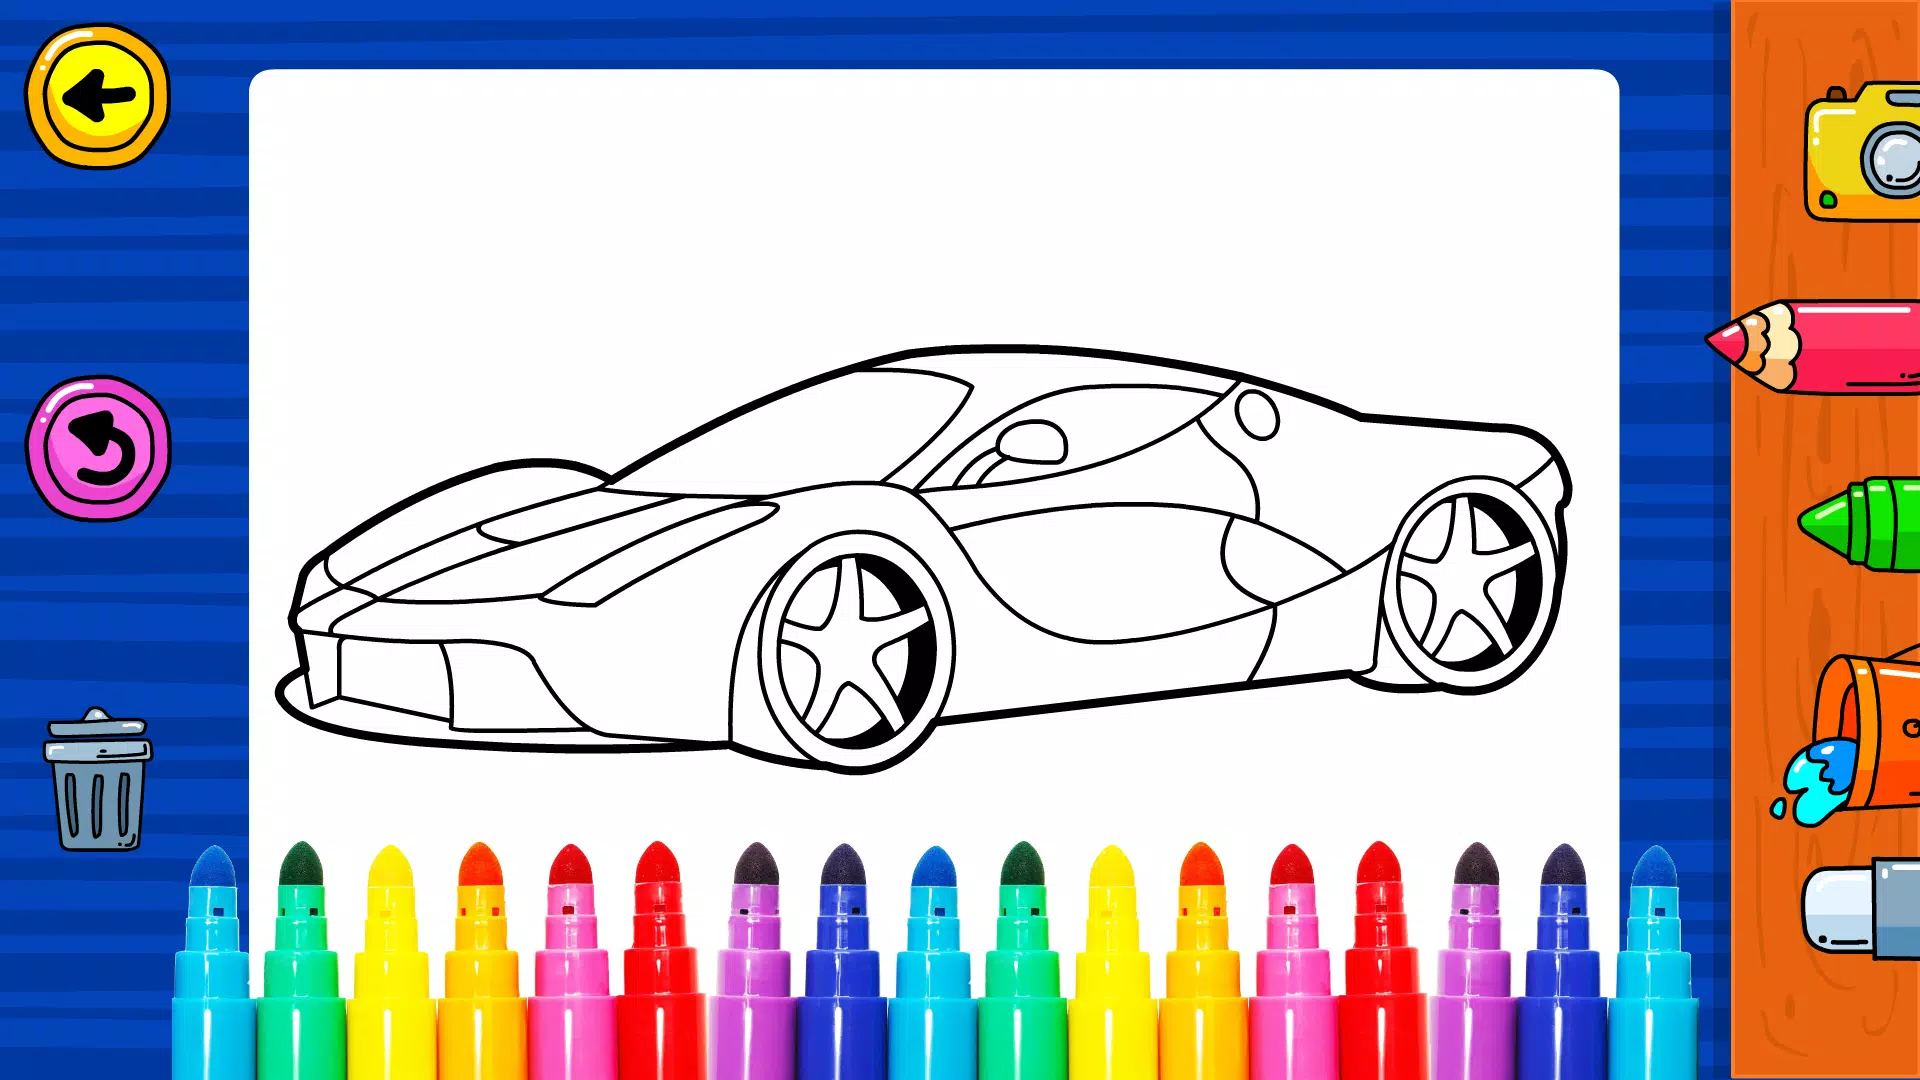 Coloring Games for Toddlers * Car